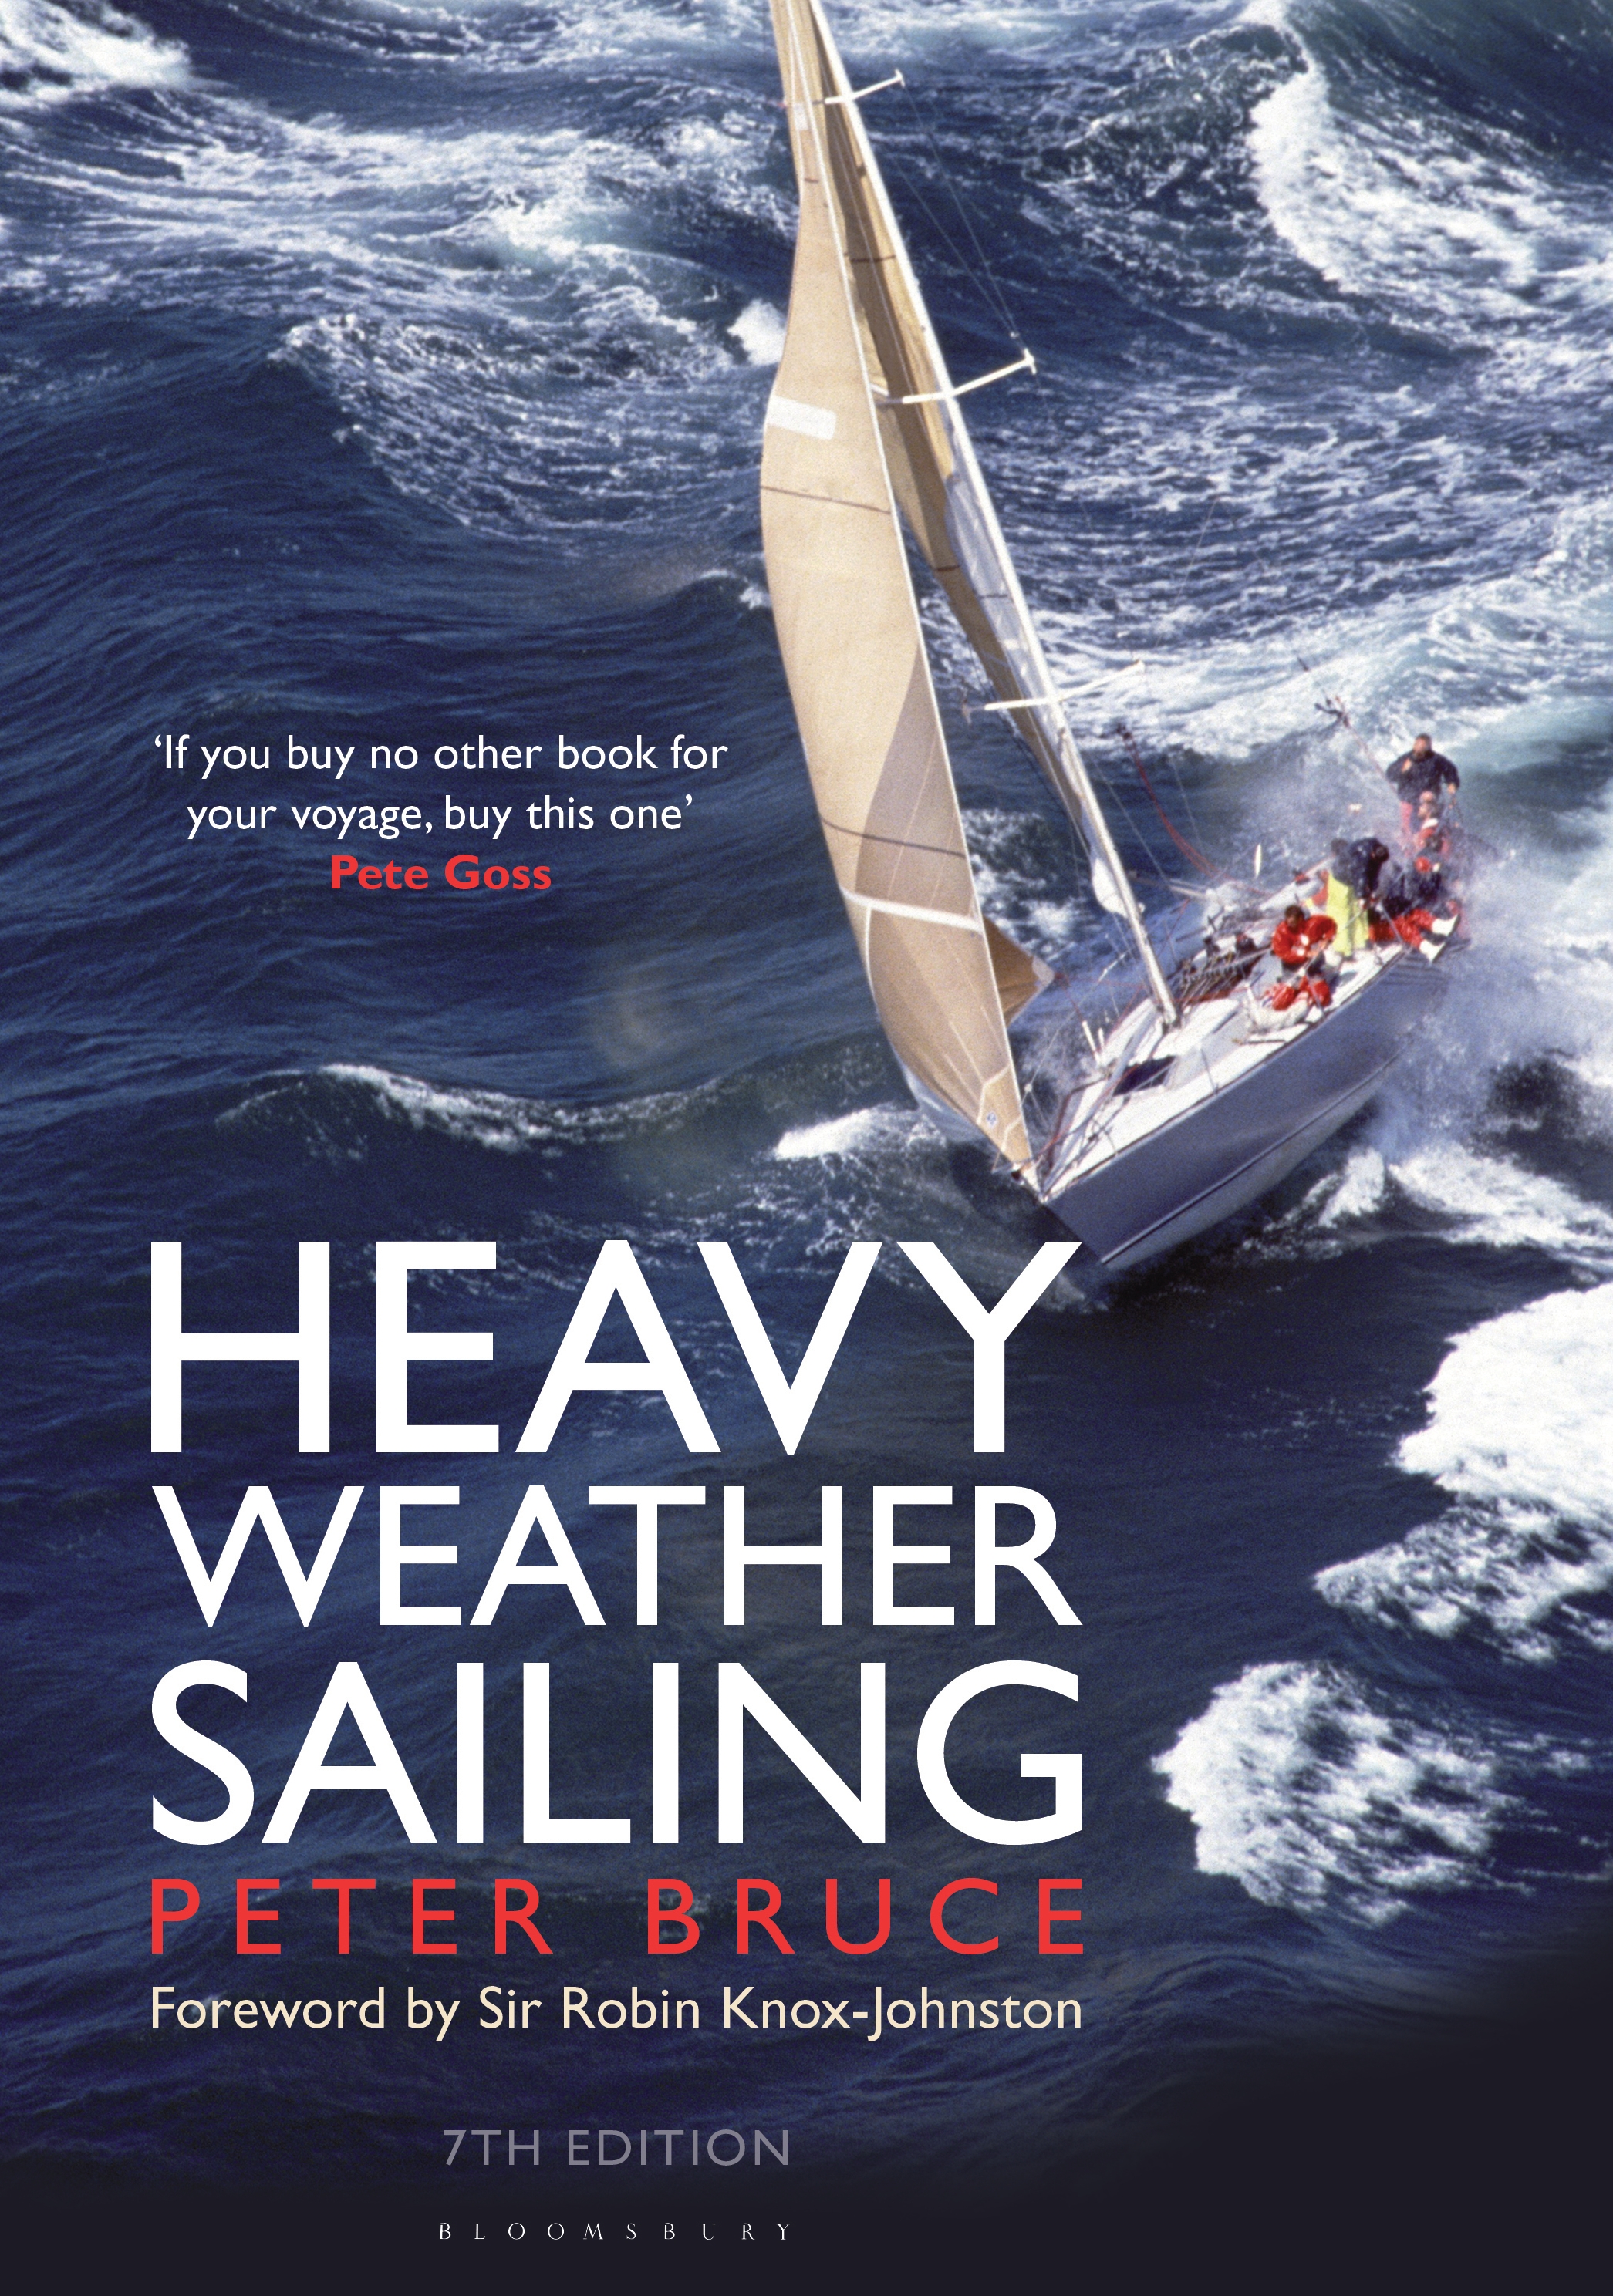 Heavy Weather Sailing 7th edition - 25-49.99